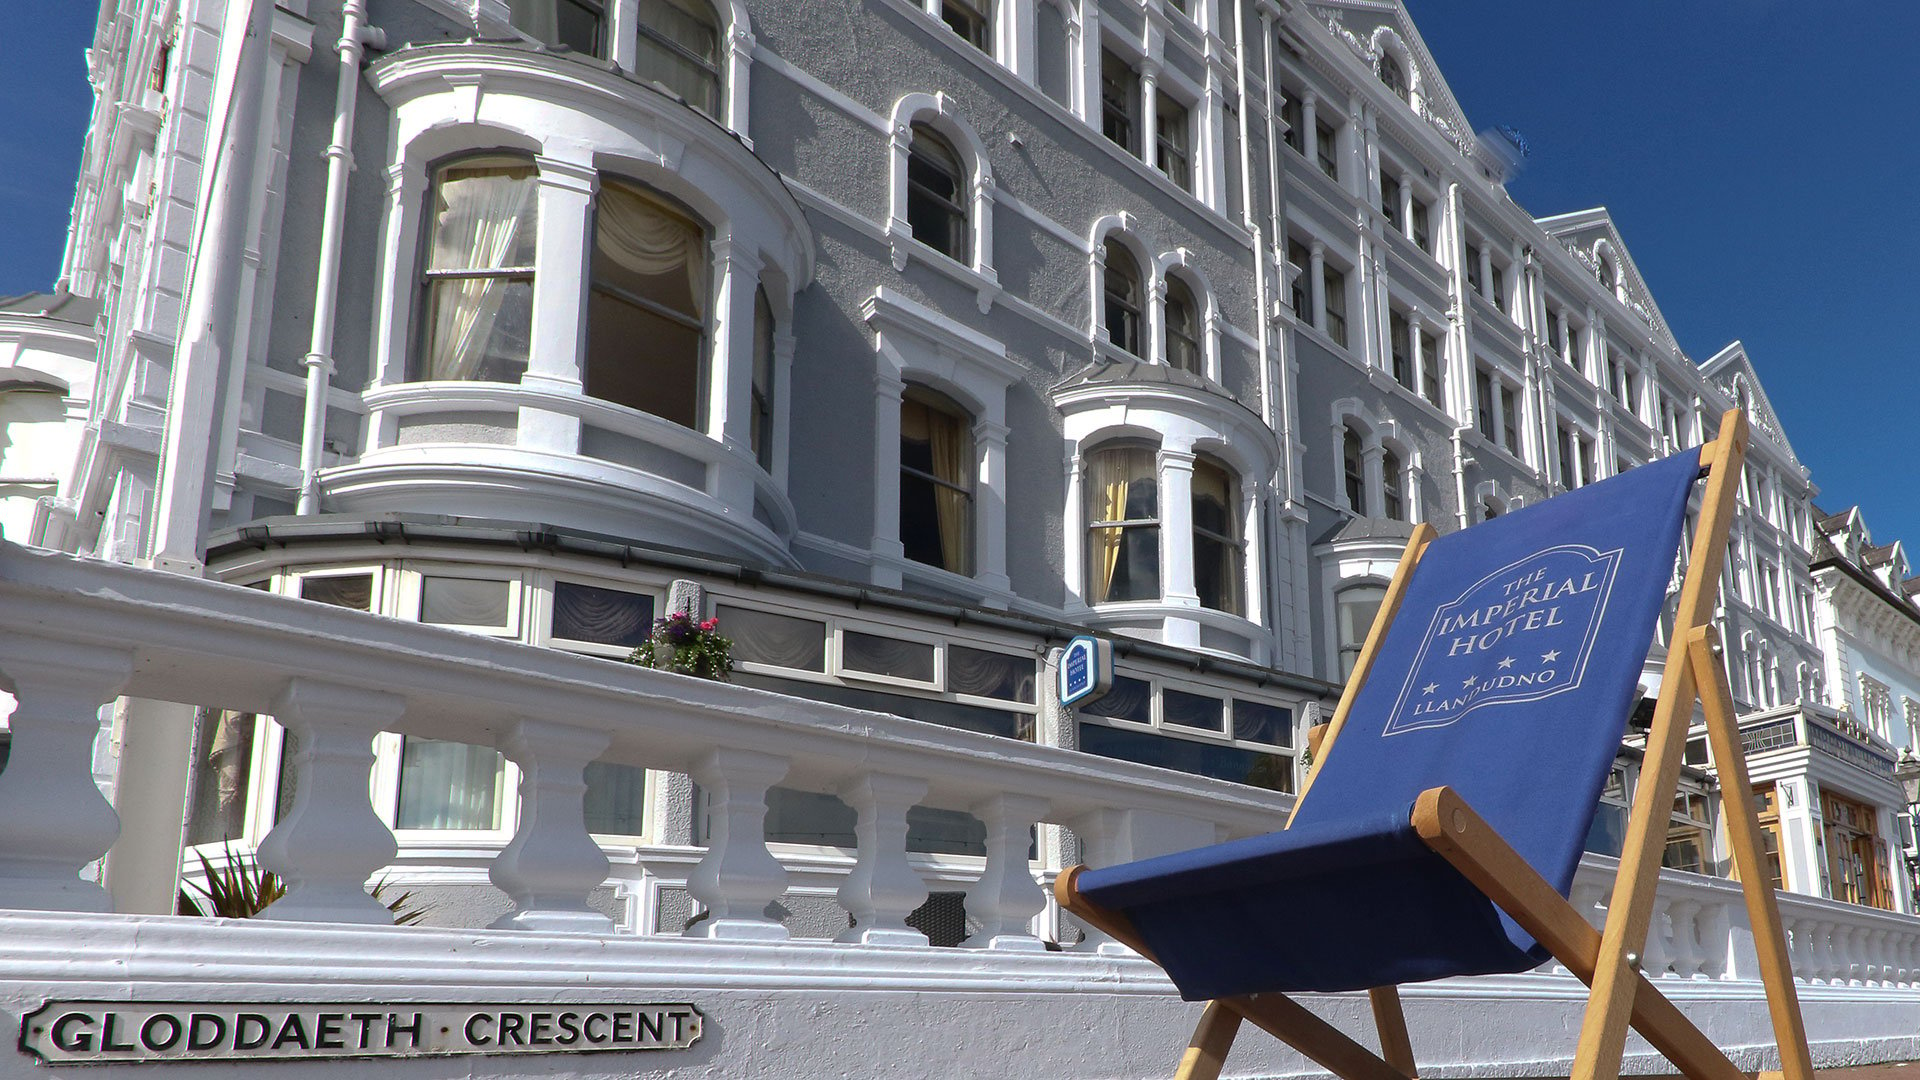 The hotel deck chair in the sunshine - The Imperial Hotel, Llandudno